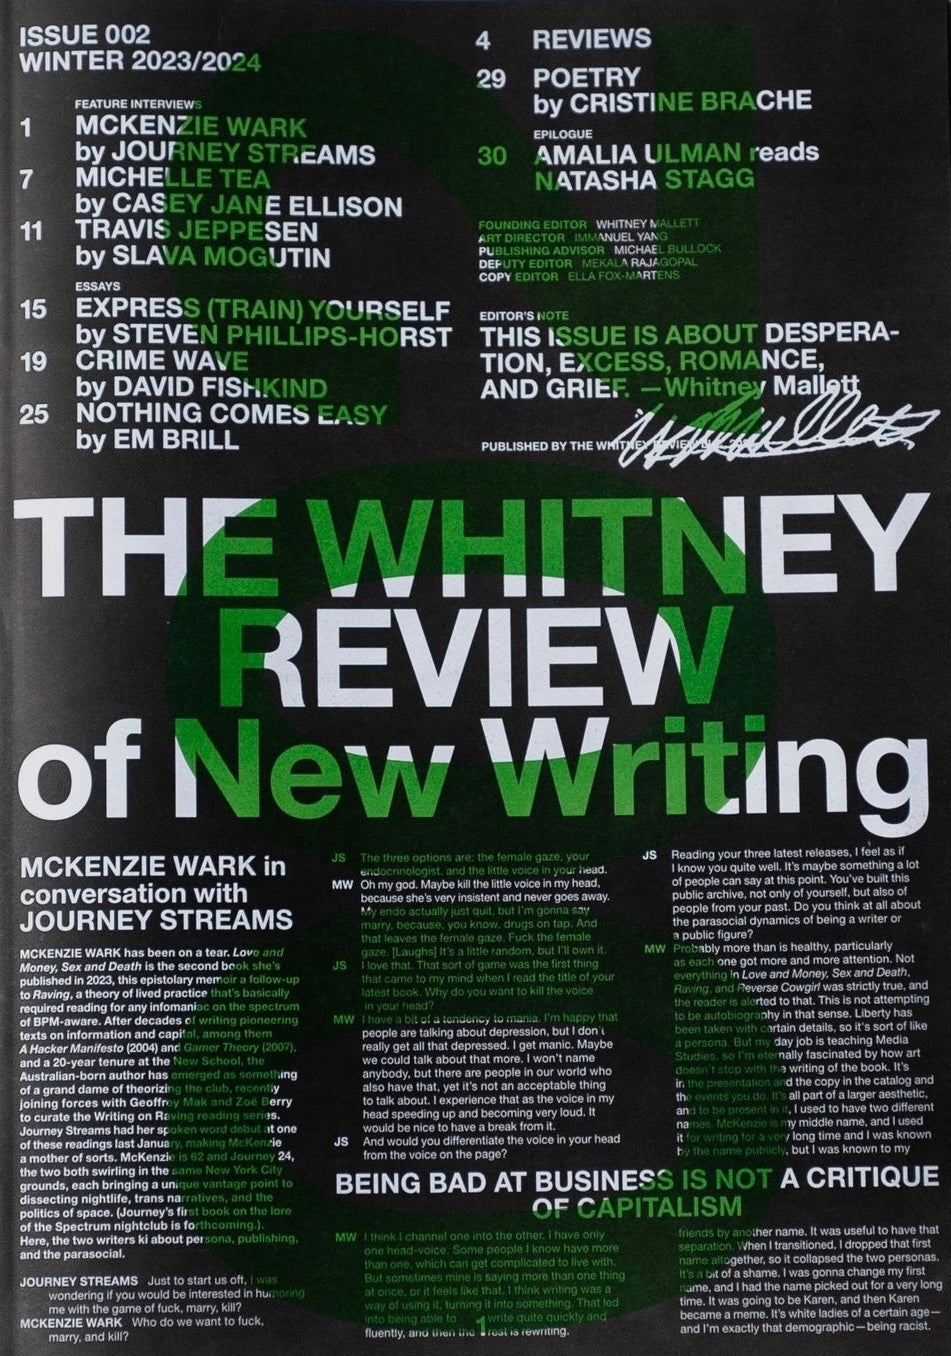 The Whitney Review of New Writing #02